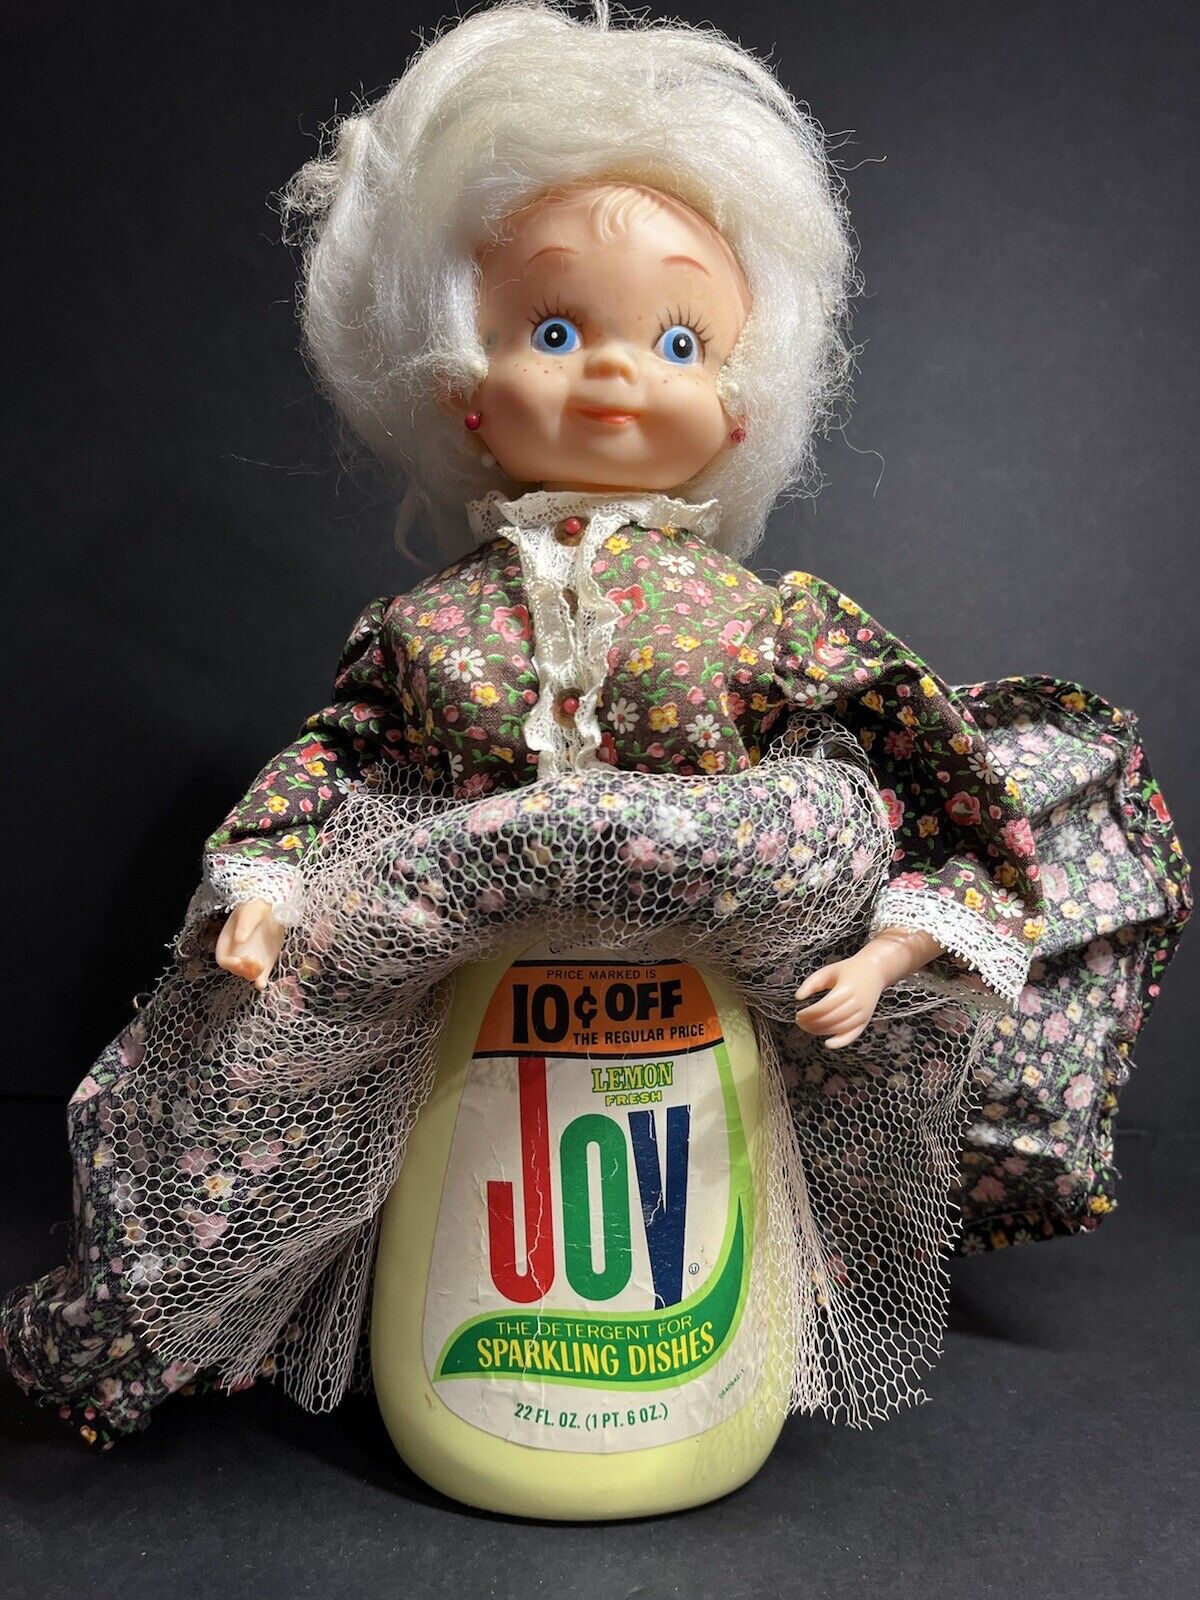 1980s Vintage Mrs. Claus Soap Bottle Doll Handcrafted Christmas Figures Joy Dish